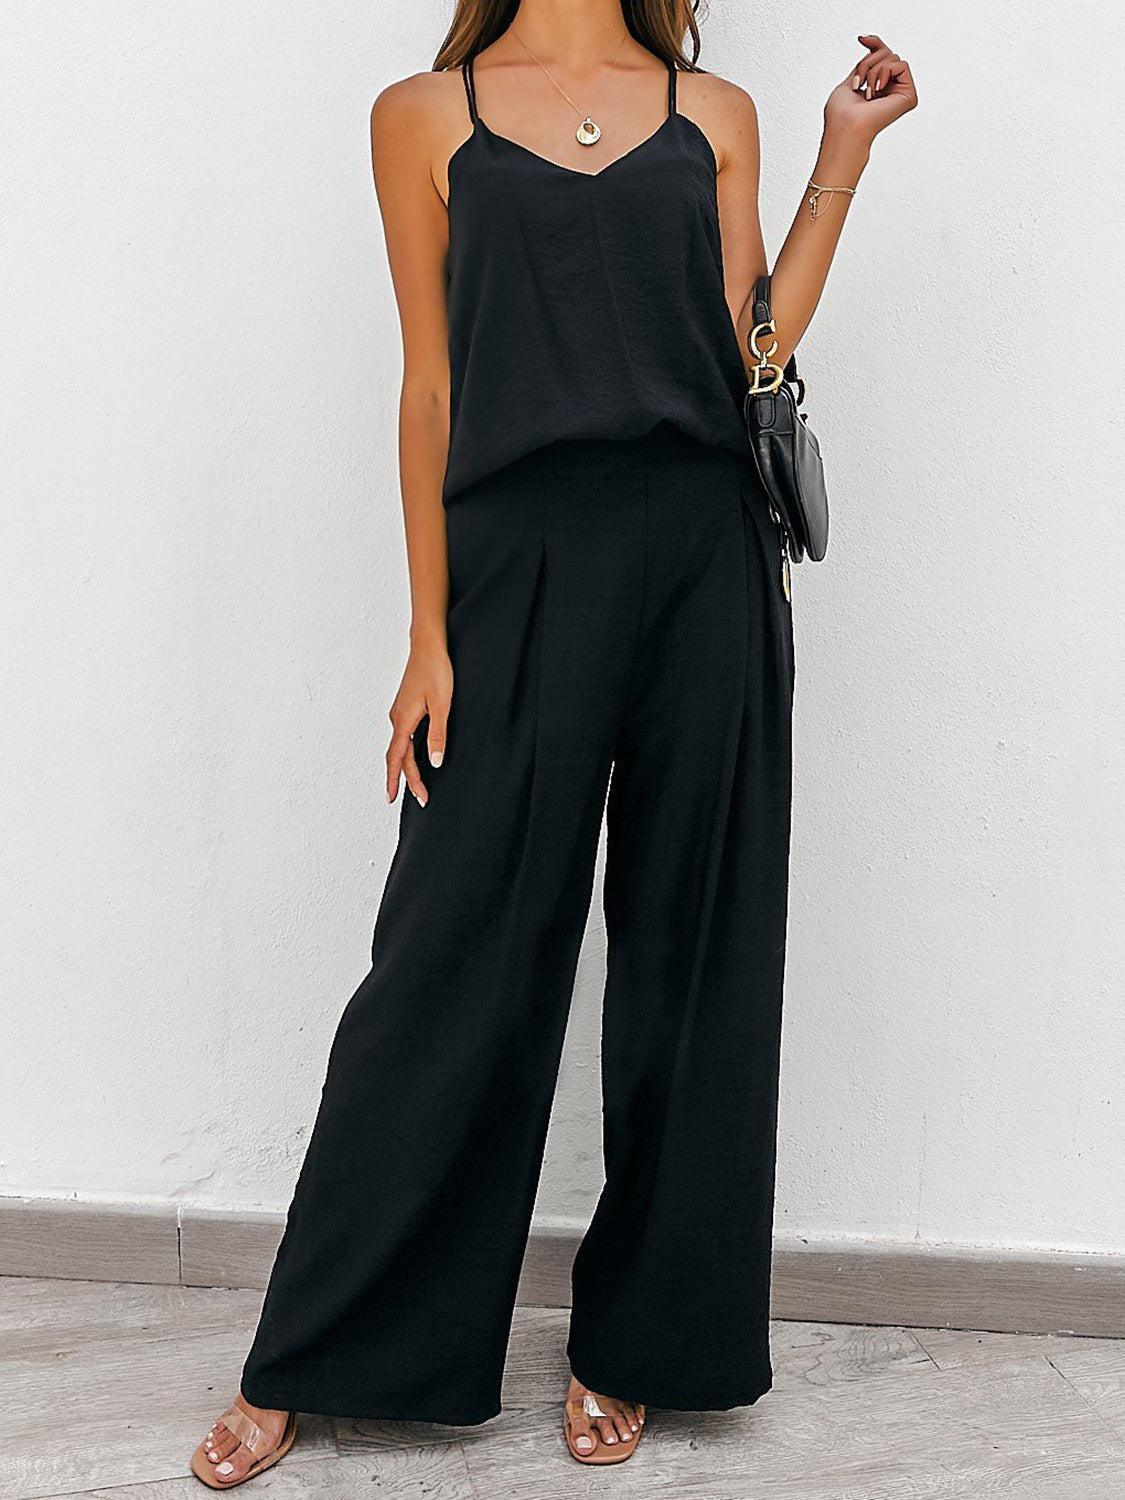 a woman in a black tank top and wide legged black pants